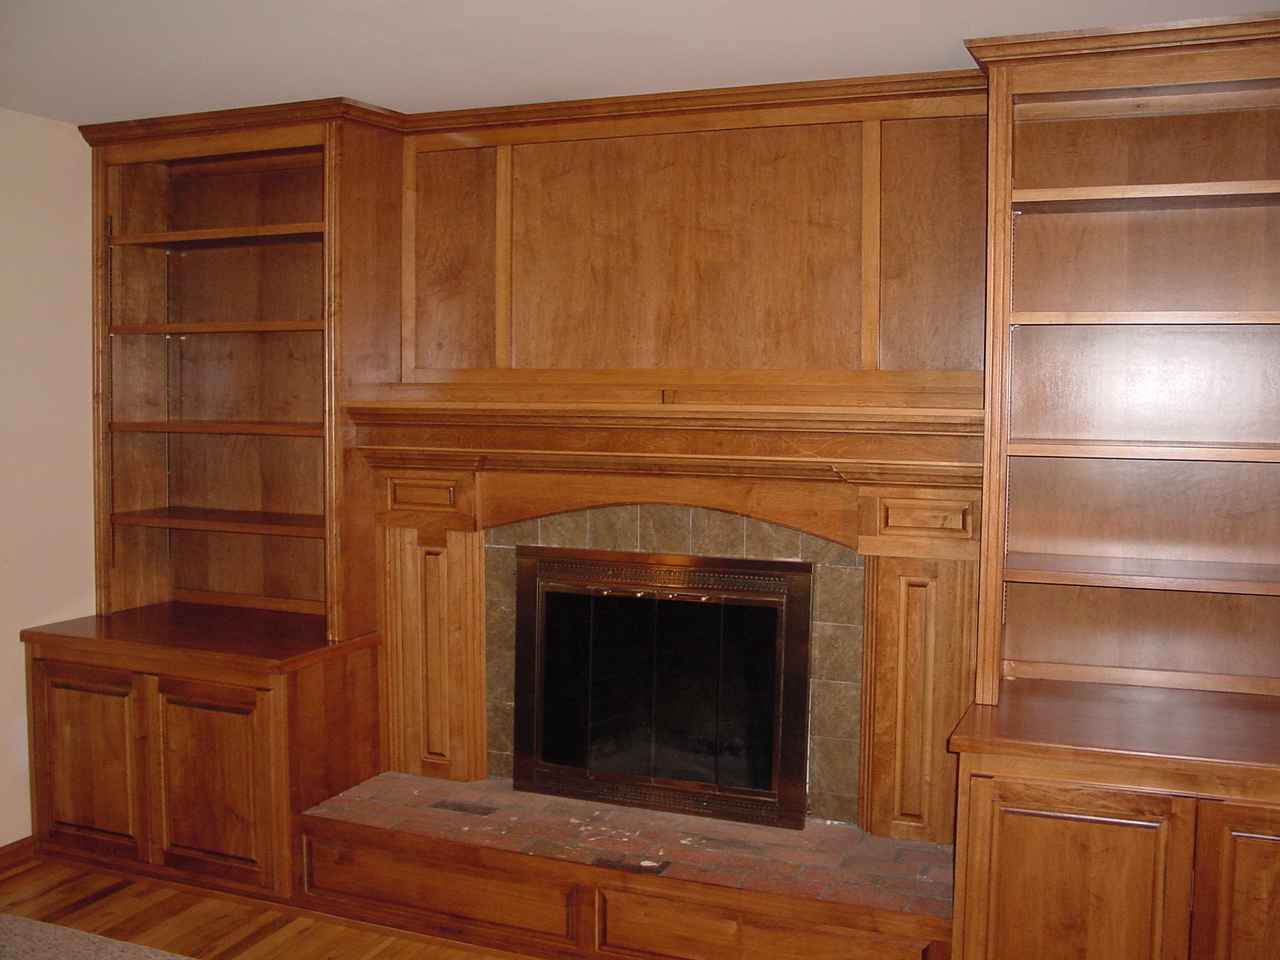 Our custom cherry wood stained cabinets in the family room, fireplaces with built-in bookcases in Upper Makefield, Washington Crossing area of Bucks County gives this large family much-needed storage.